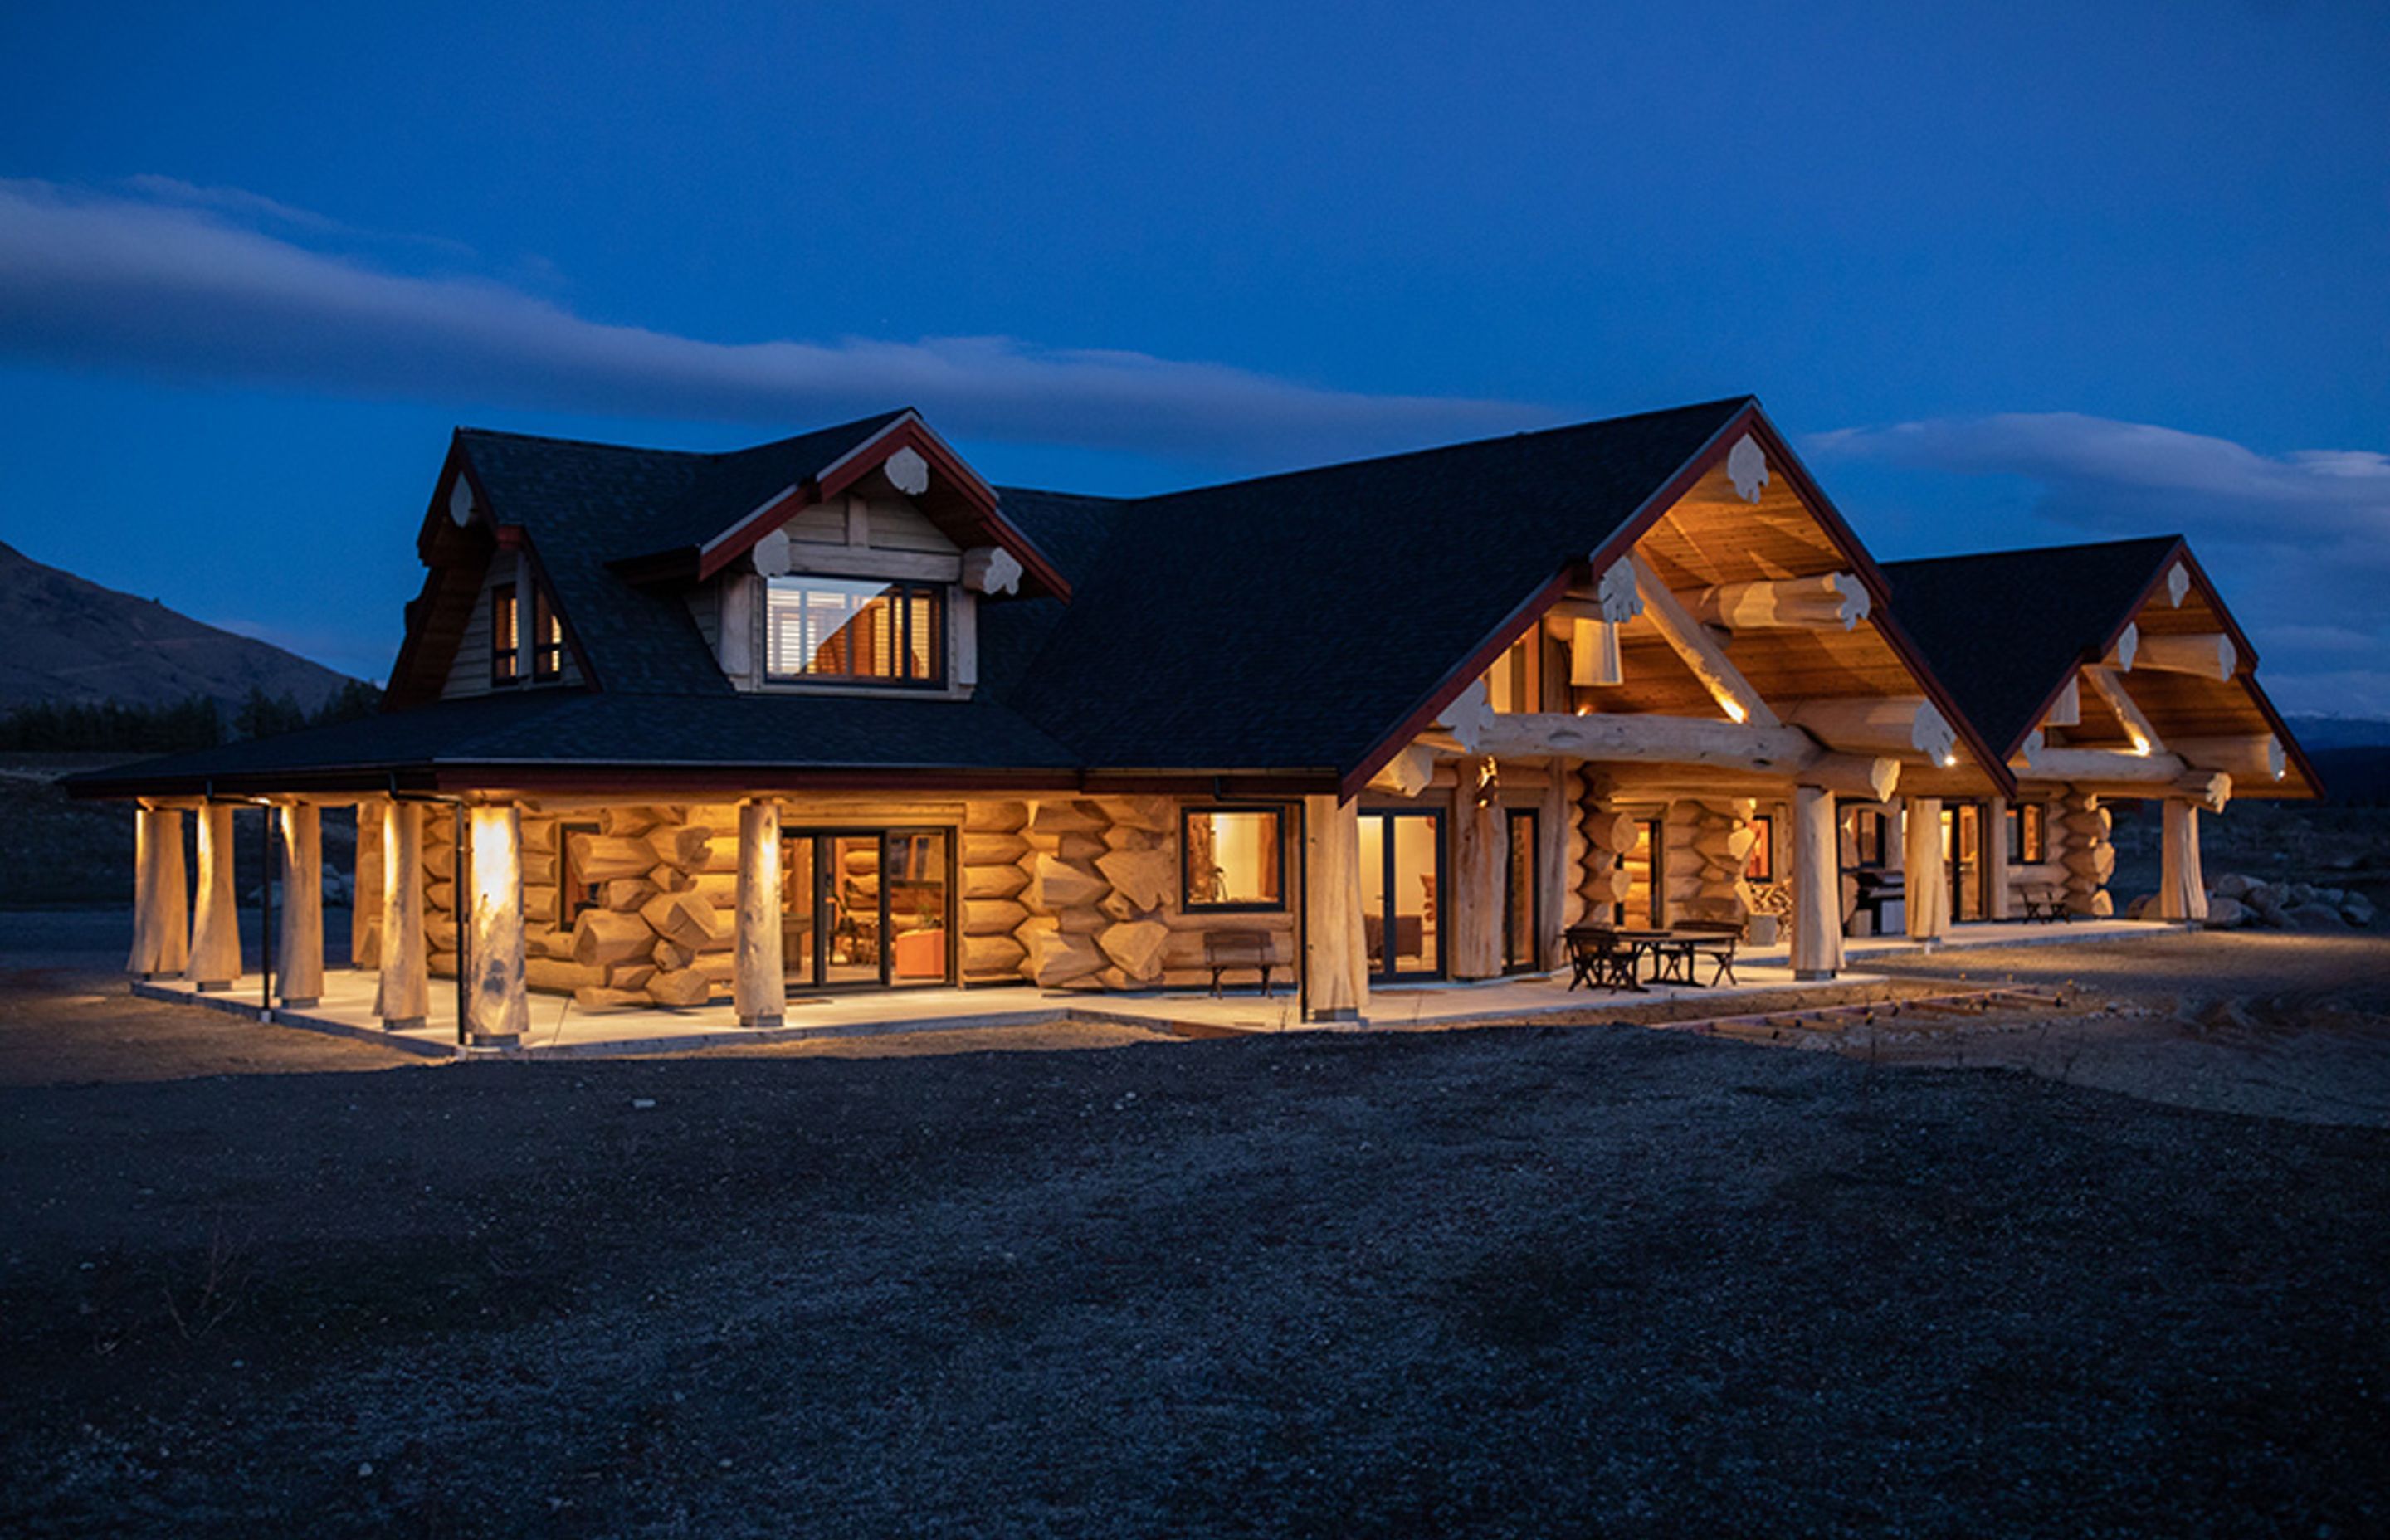 Inspired by the log homes in Whistler and Colorado, the house frame was built in Canada out of two 300-year-old Western Red Cedar logs and then shipped to New Zealand for assembly and fitout.